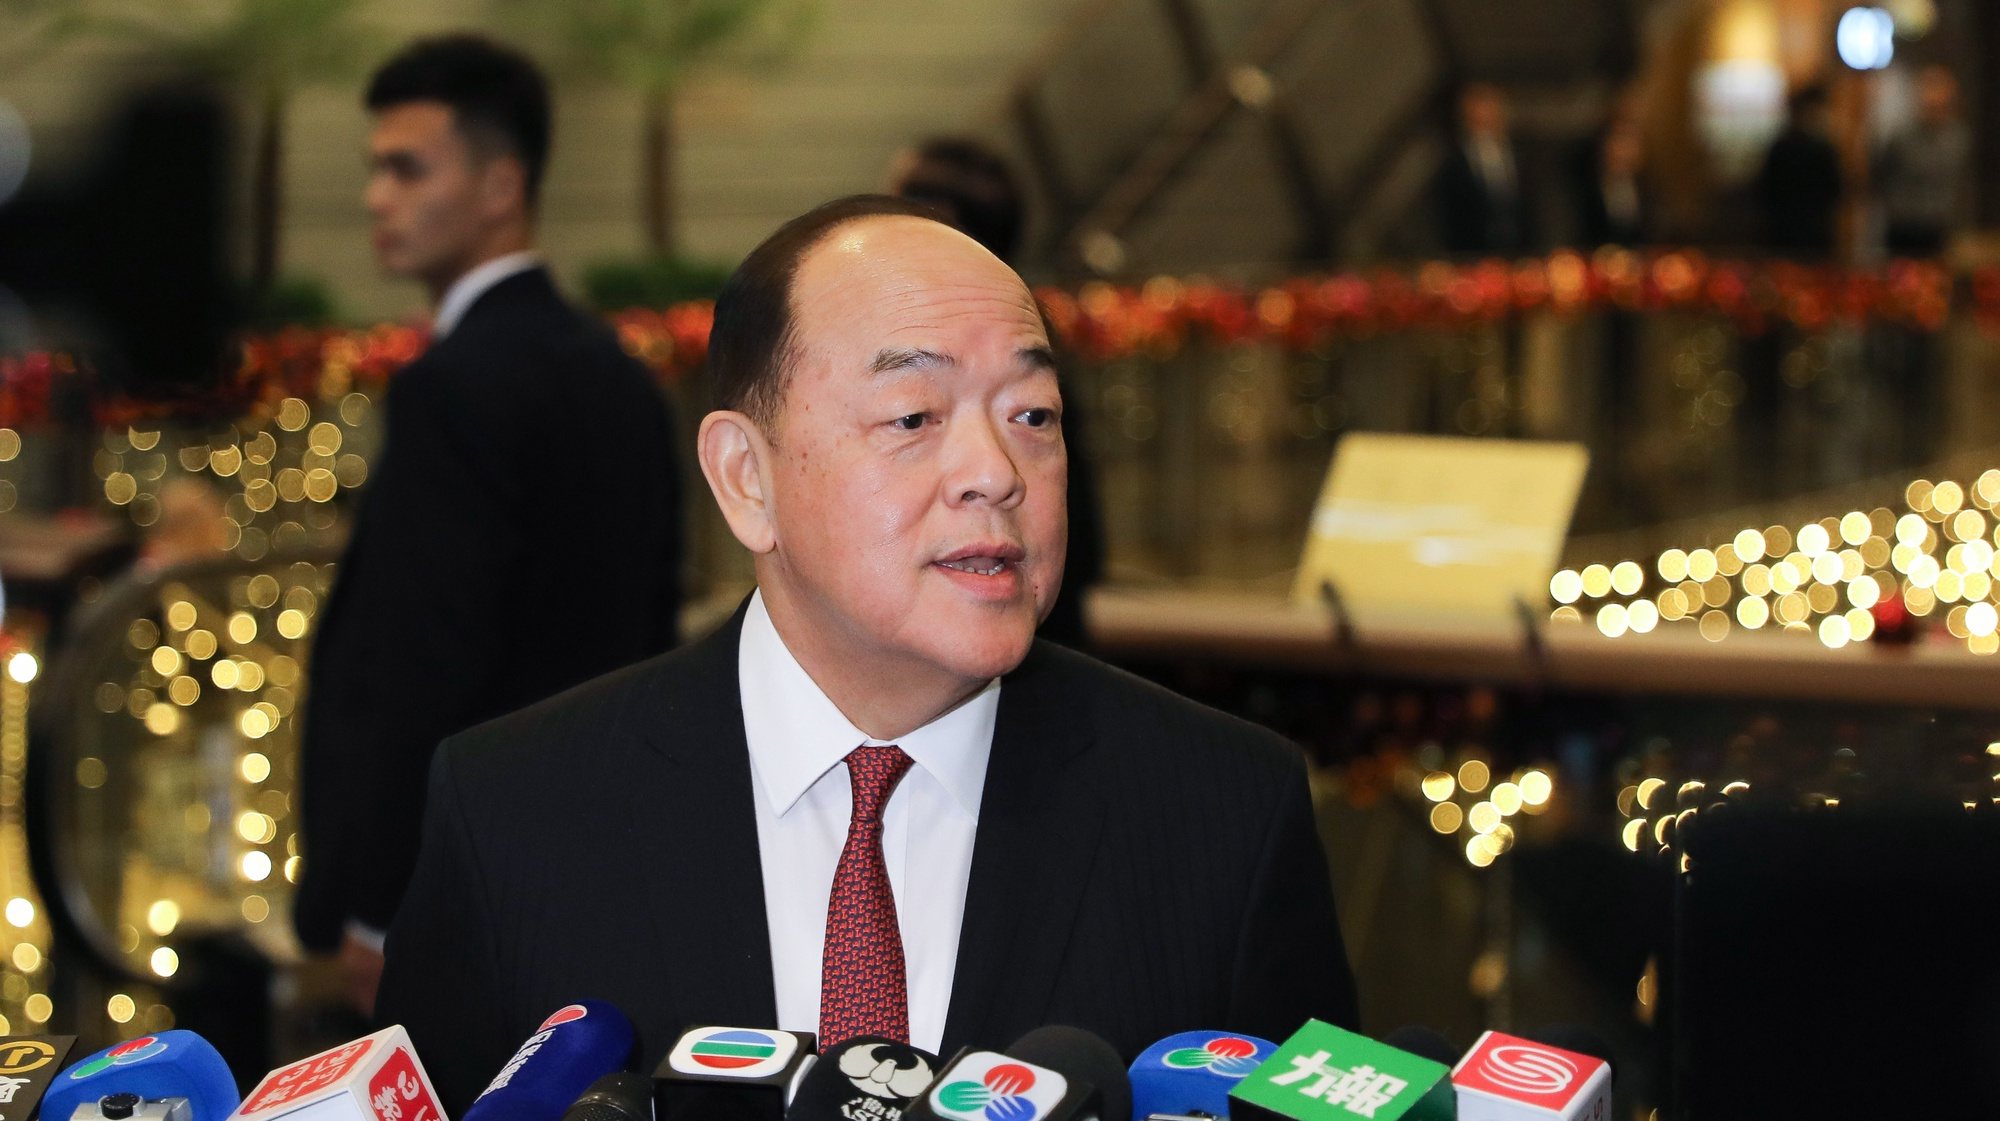 epa08083137 New Maca&#039;s SAR Chief Executive Ho Iat Seng talks to the press during a reception at Macao Tower under the Macao Special Administrative Region of the People&#039;s Republic of China 20th anniversary celebrations in Macao, China, 20 December 2019. Macao had been a Portuguese colony until 1999 when it returned to Chinese rule under the &#039;one country, two systems&#039; principle.  EPA/JOAO RELVAS